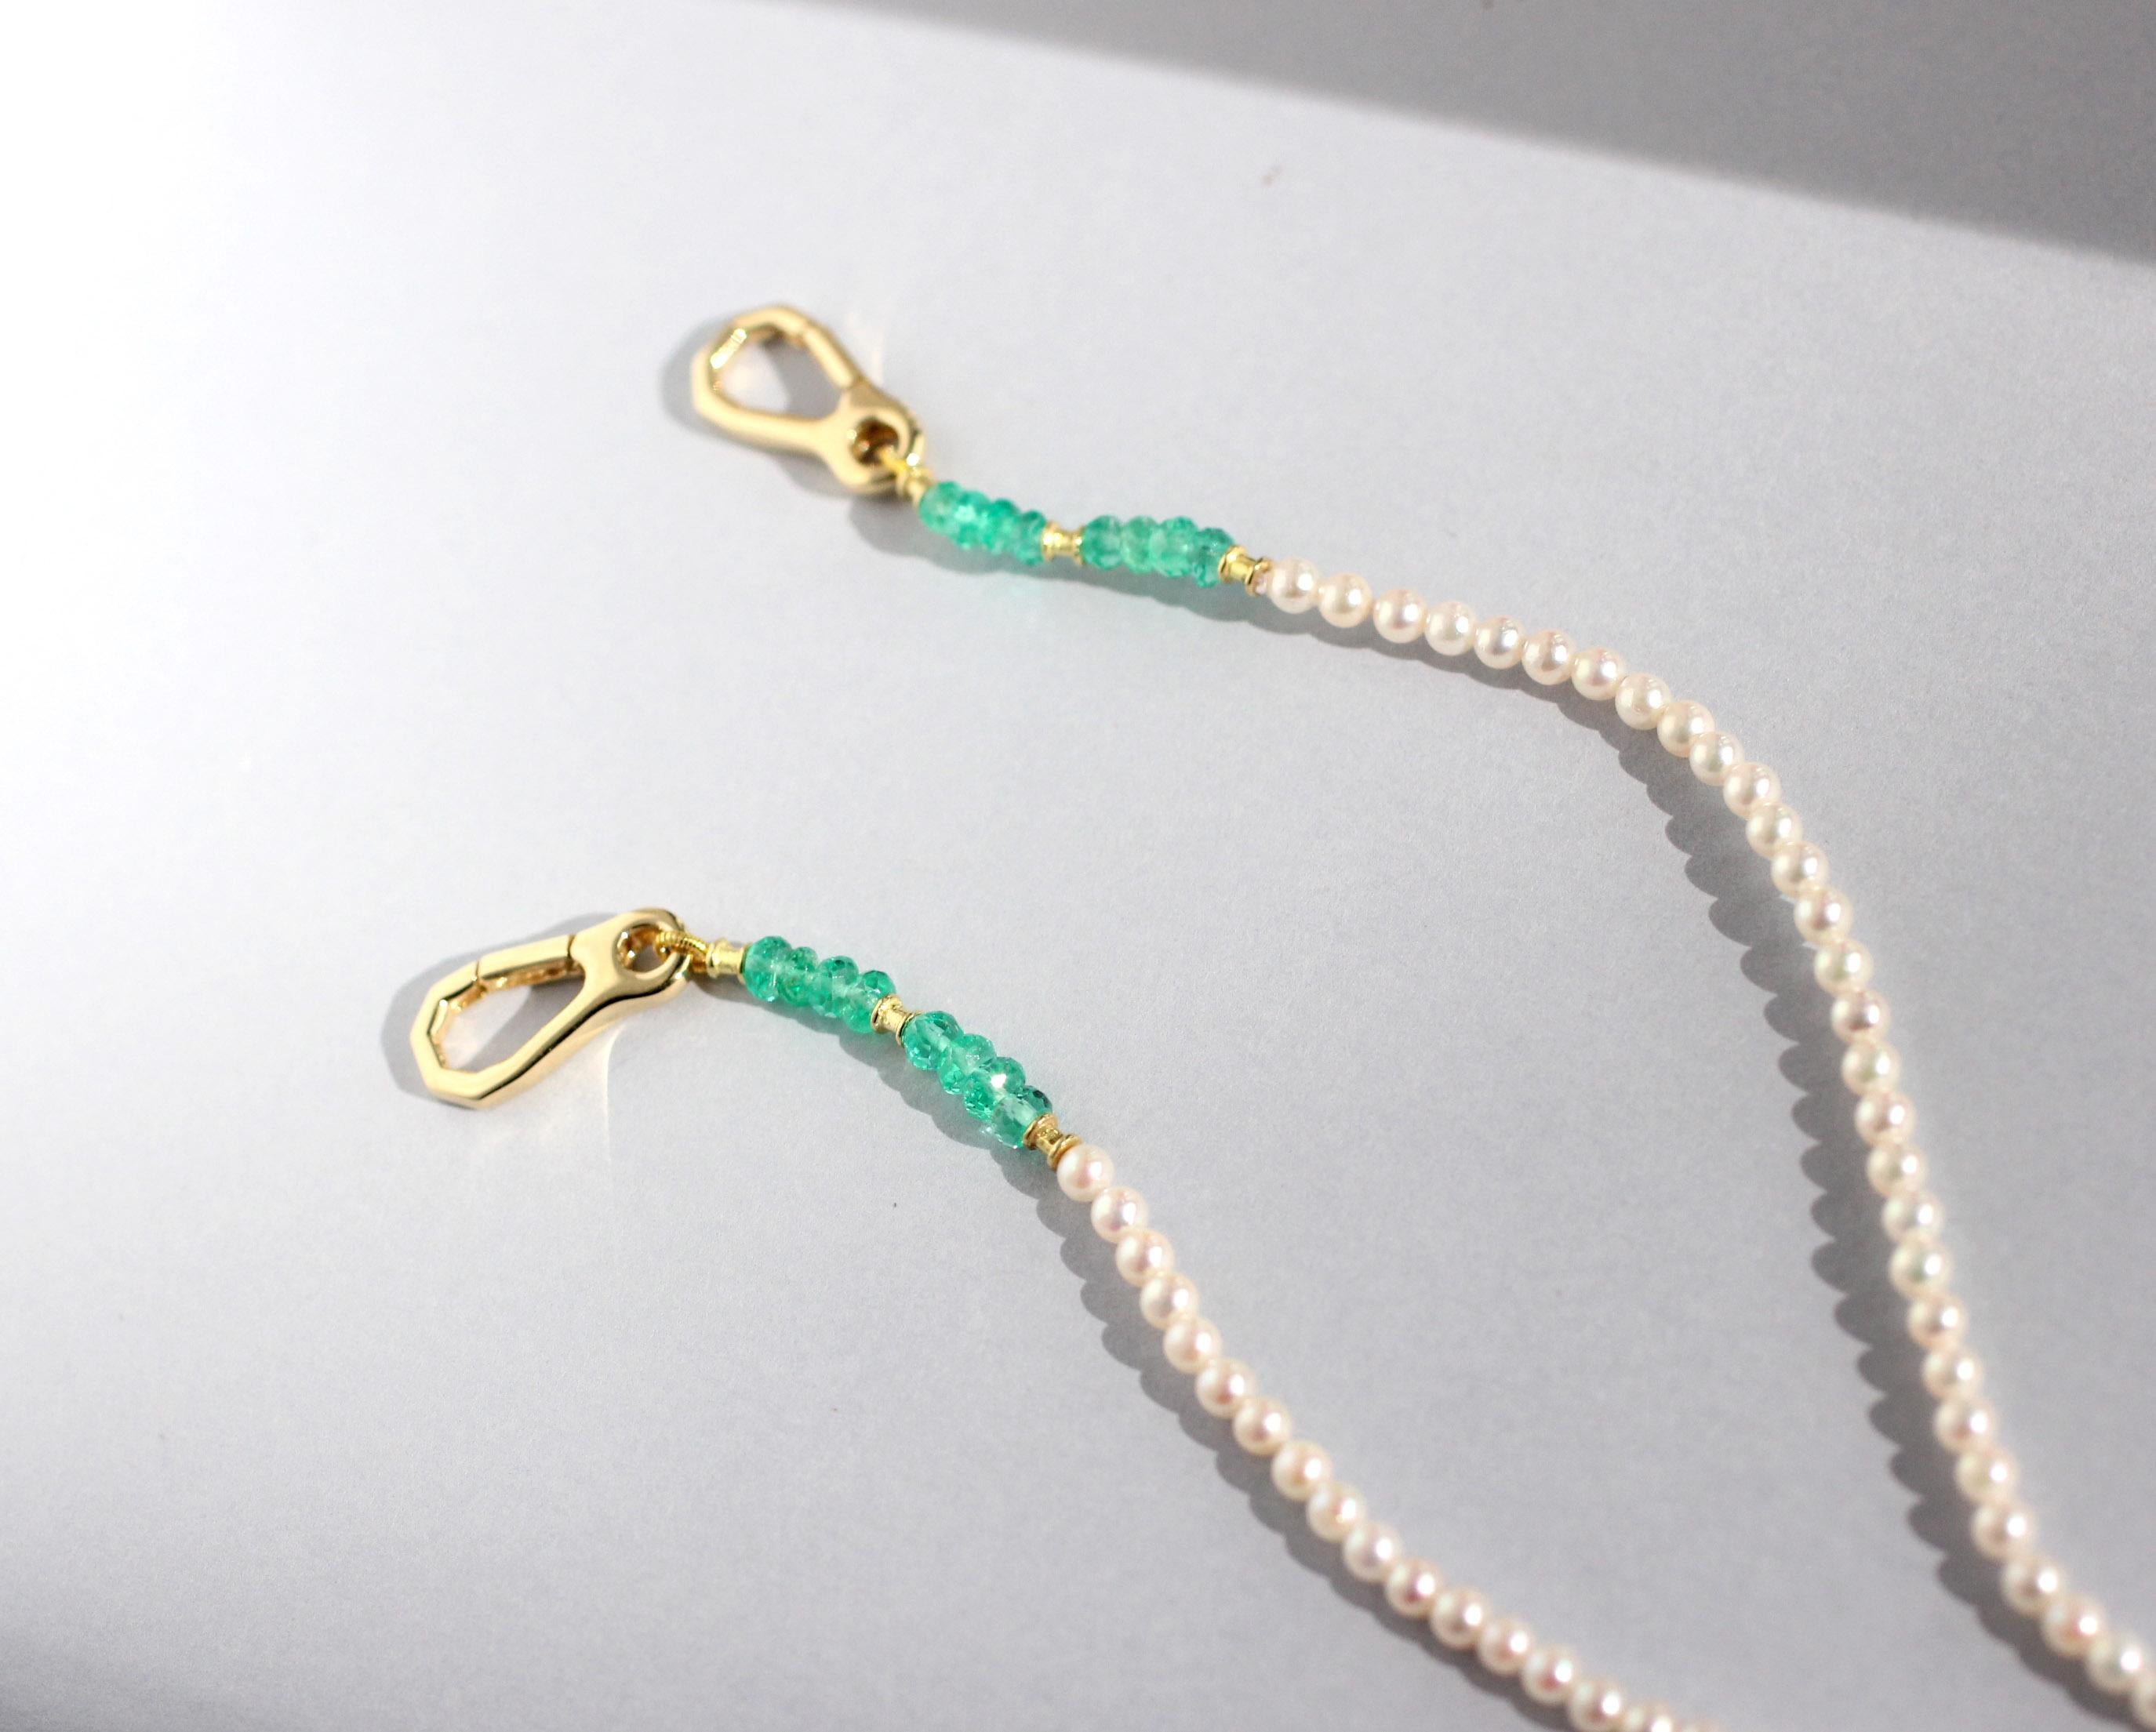 Contemporary Julius Cohen Pearl and Emerald Mask / Eyeglass Lanyard Necklace in 18 Karat Gold